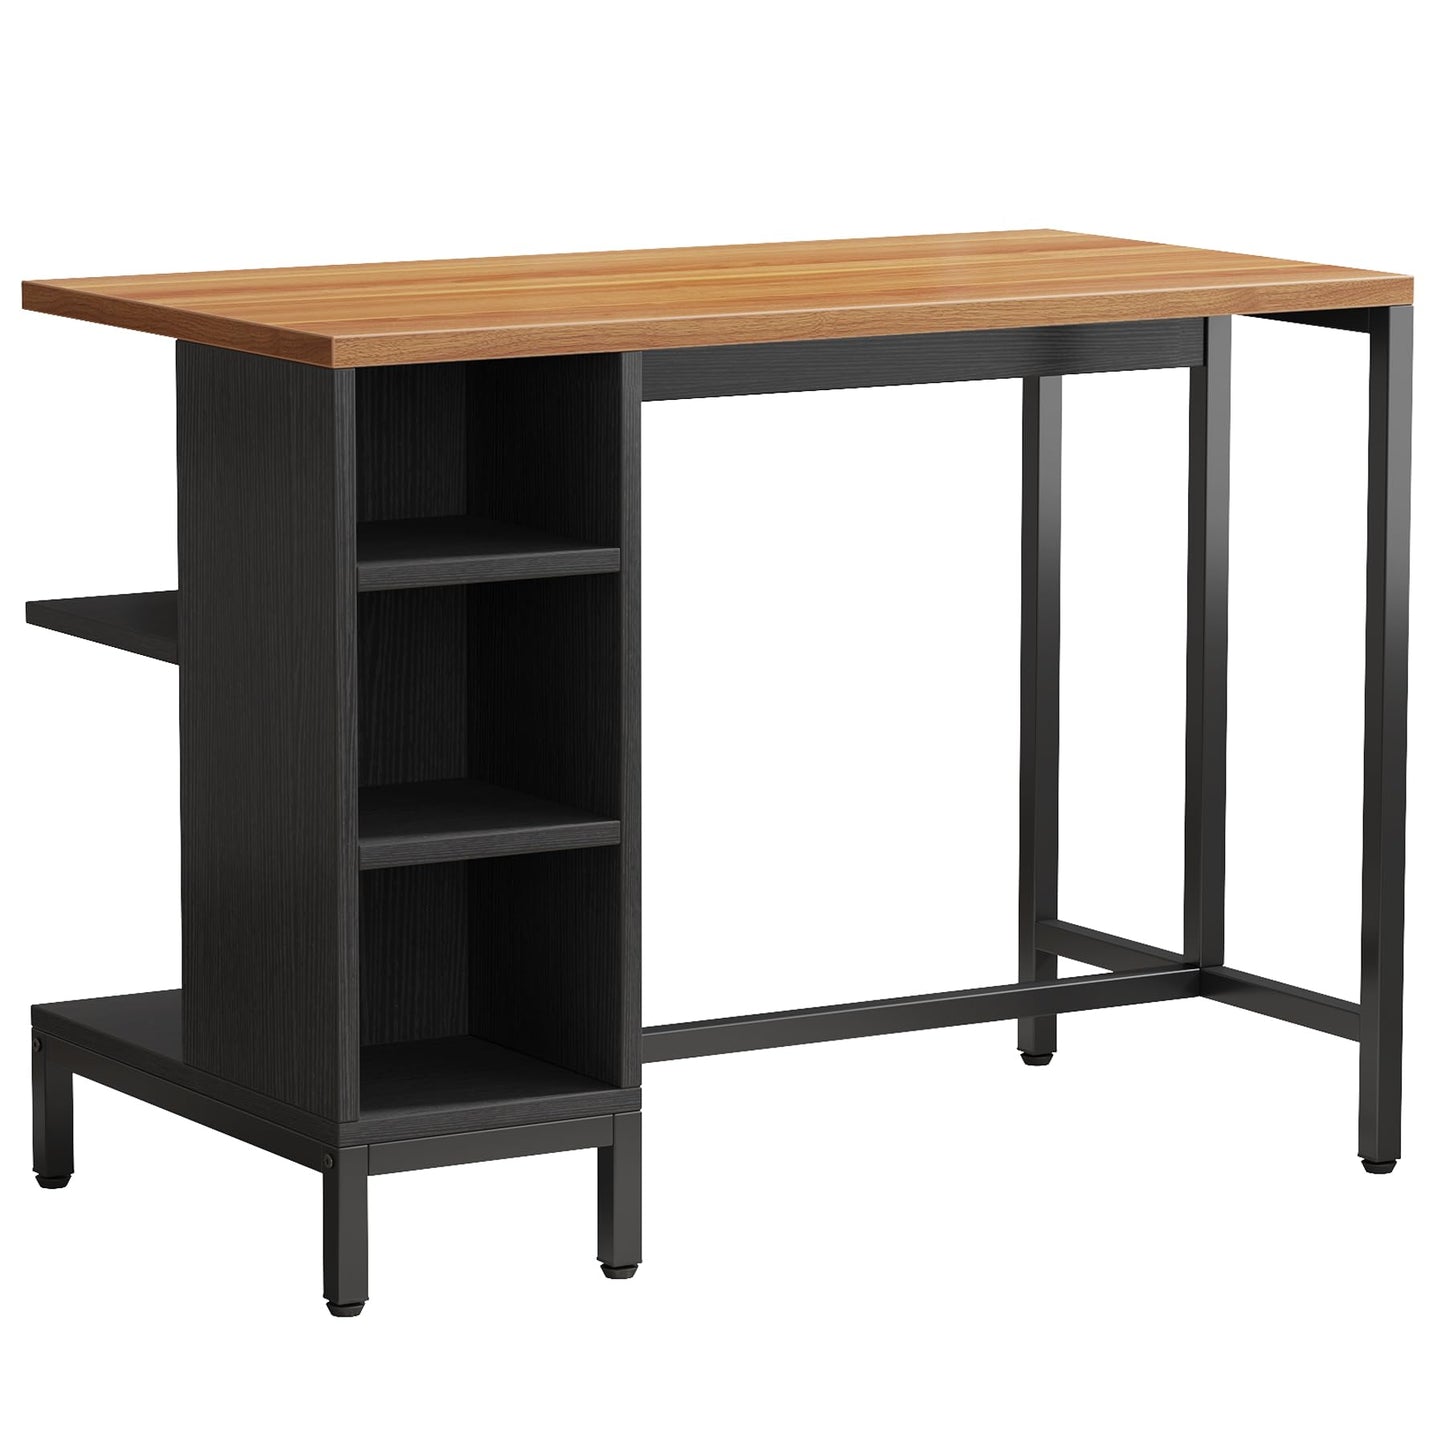 Tribesigns Kitchen Island with Shelves, 43 Inch Kitchen Shelf Kitchen Prep Table with 5 Open Storage Shelves and Large Worktop, Industrial Butcher Block Island, Dark Walnut (Stools Not Included)